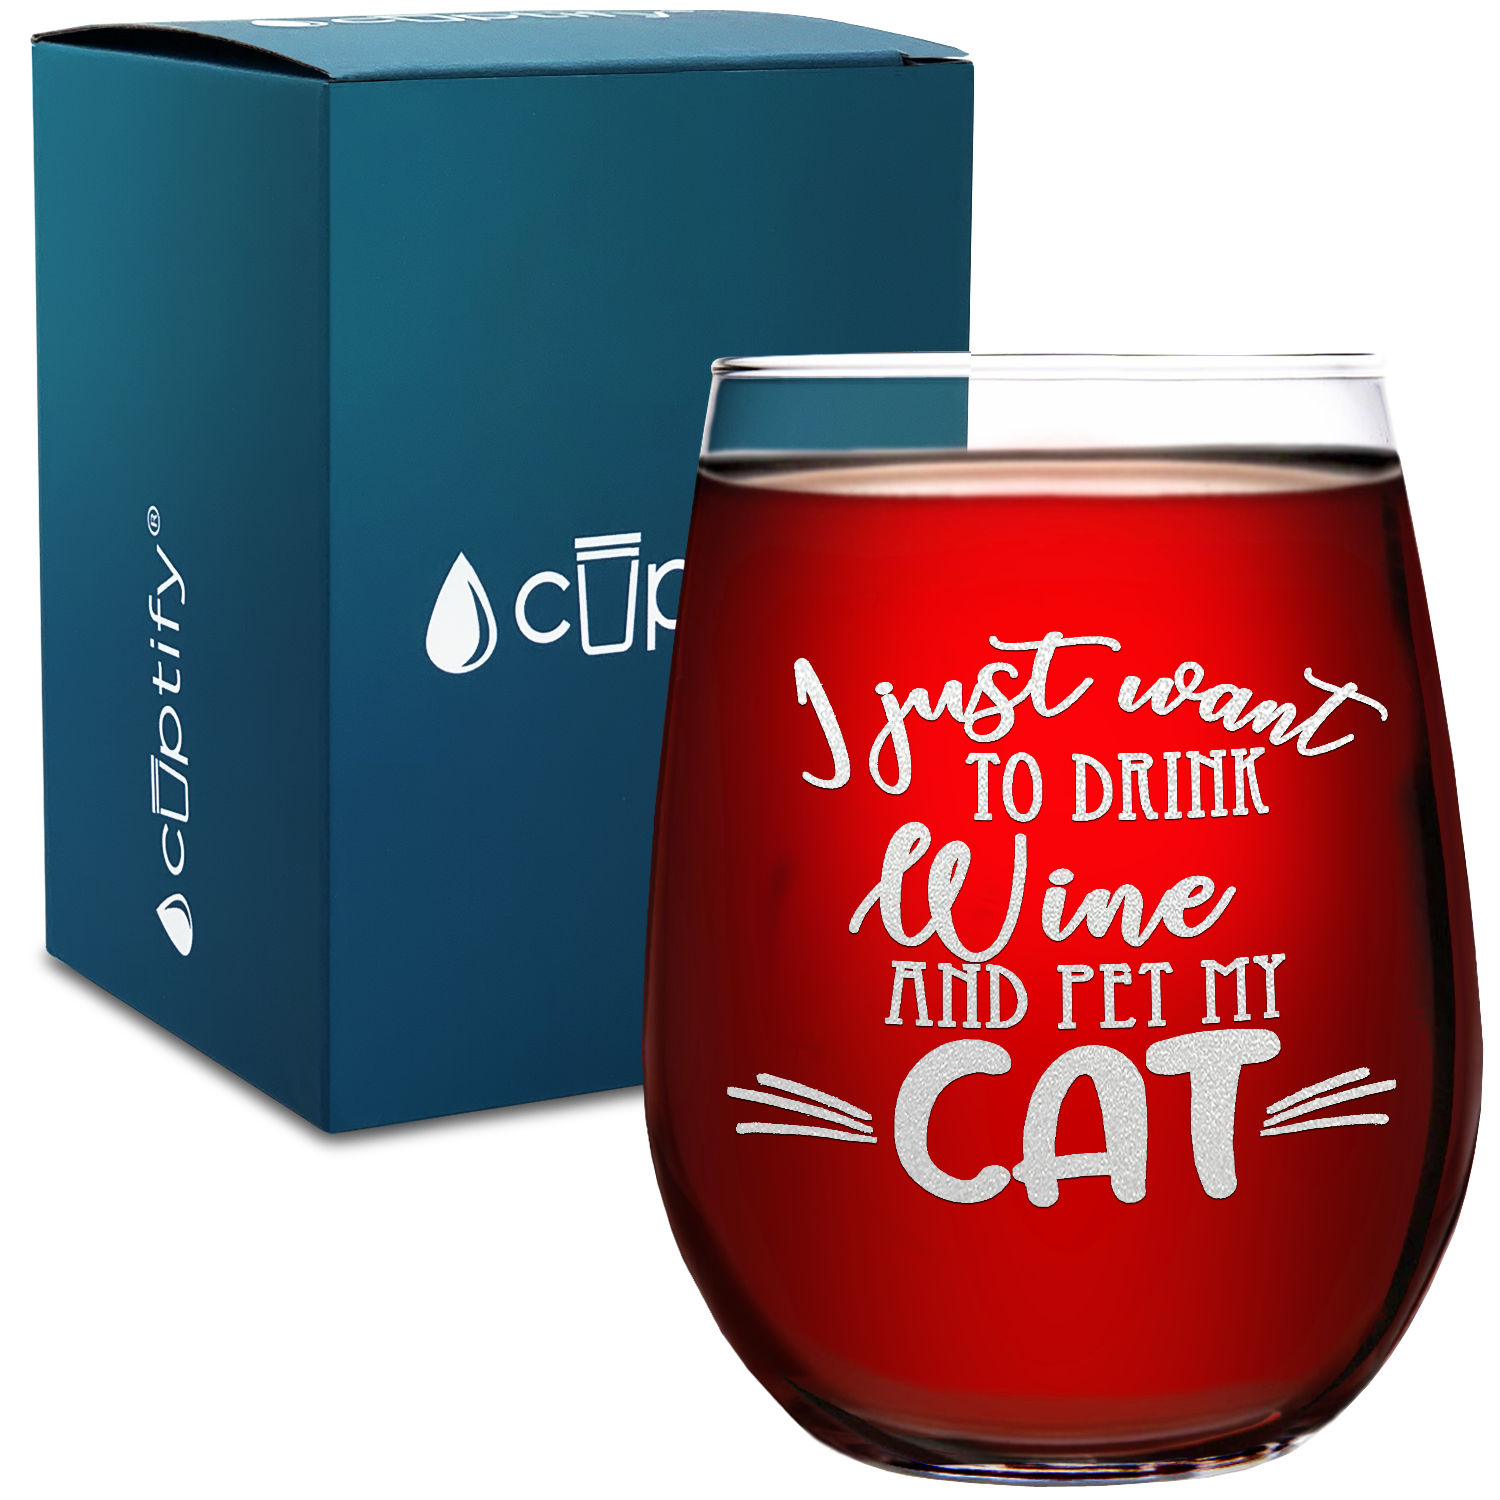 Drink wine and pet my cat on 17oz Stemless Wine Glass